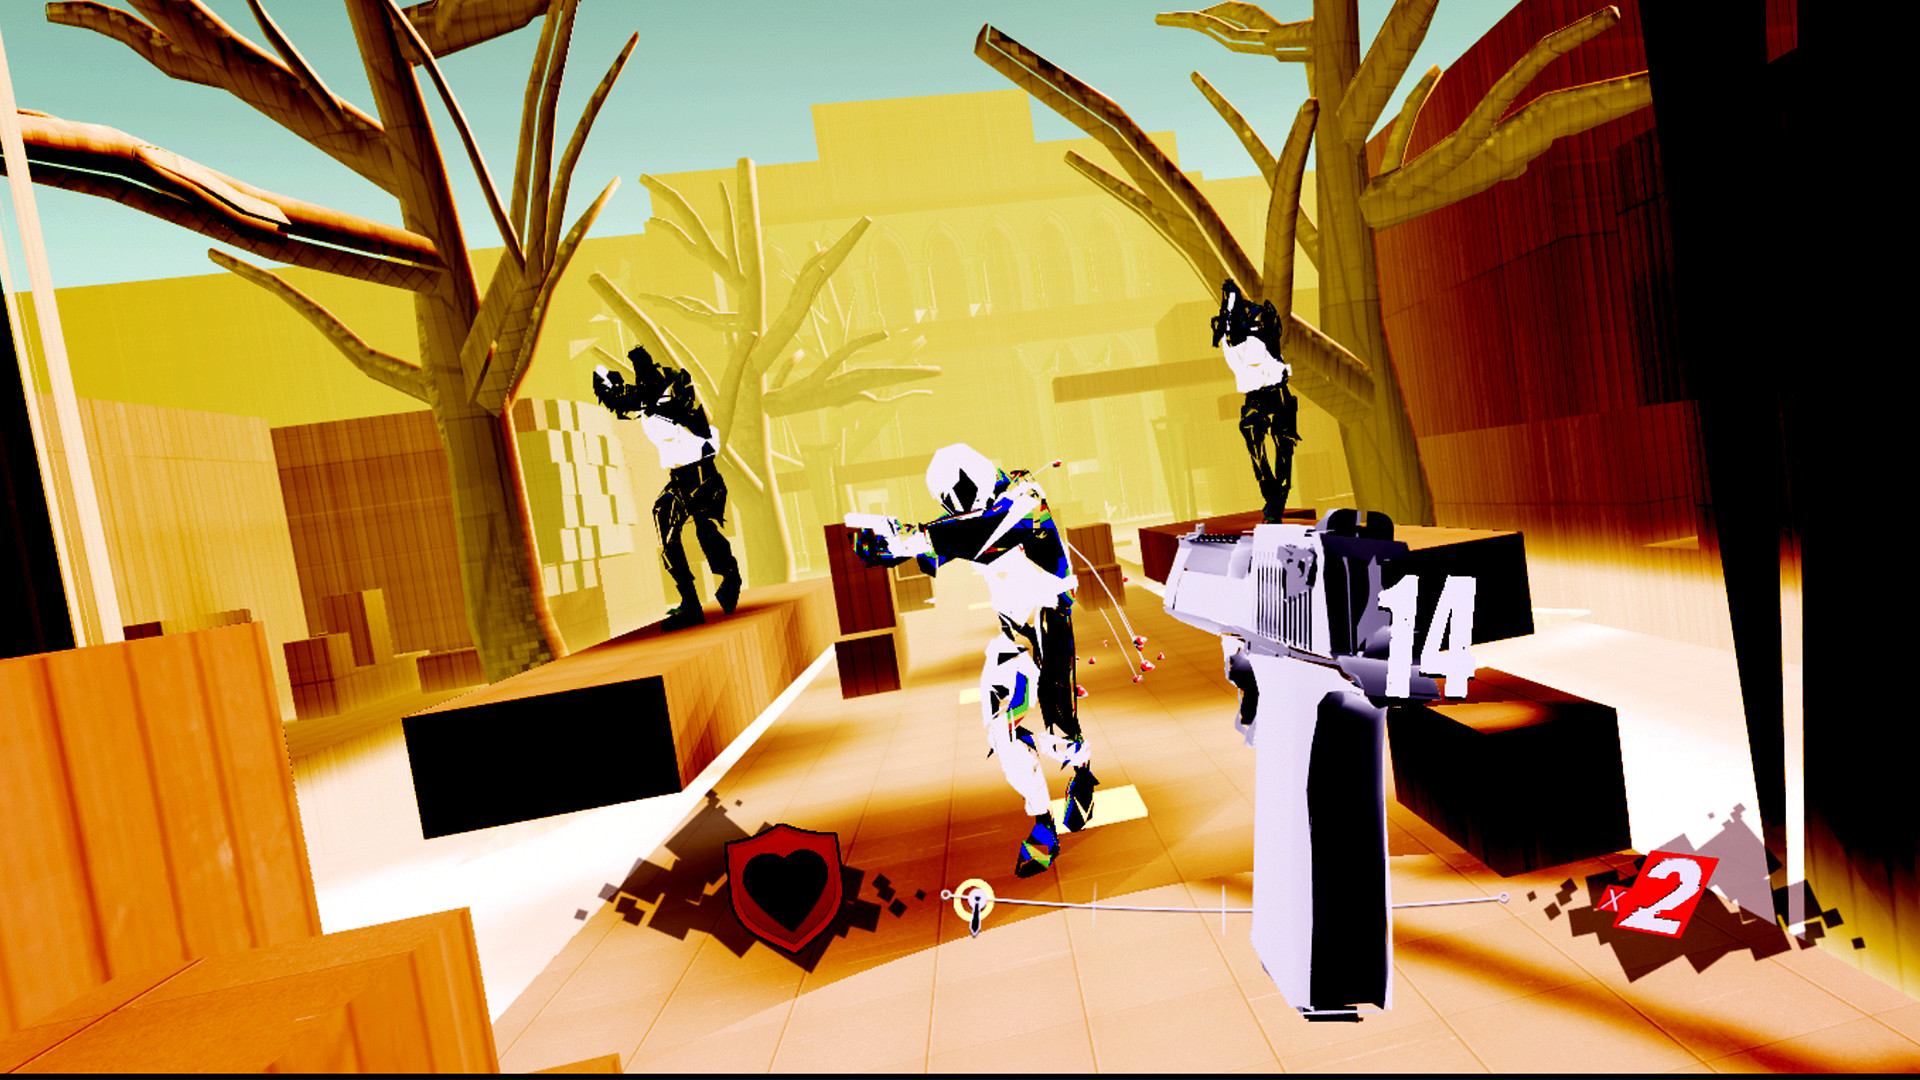 A group of enemies are unaware that the player character is ready to shoot them in Pistol Whip